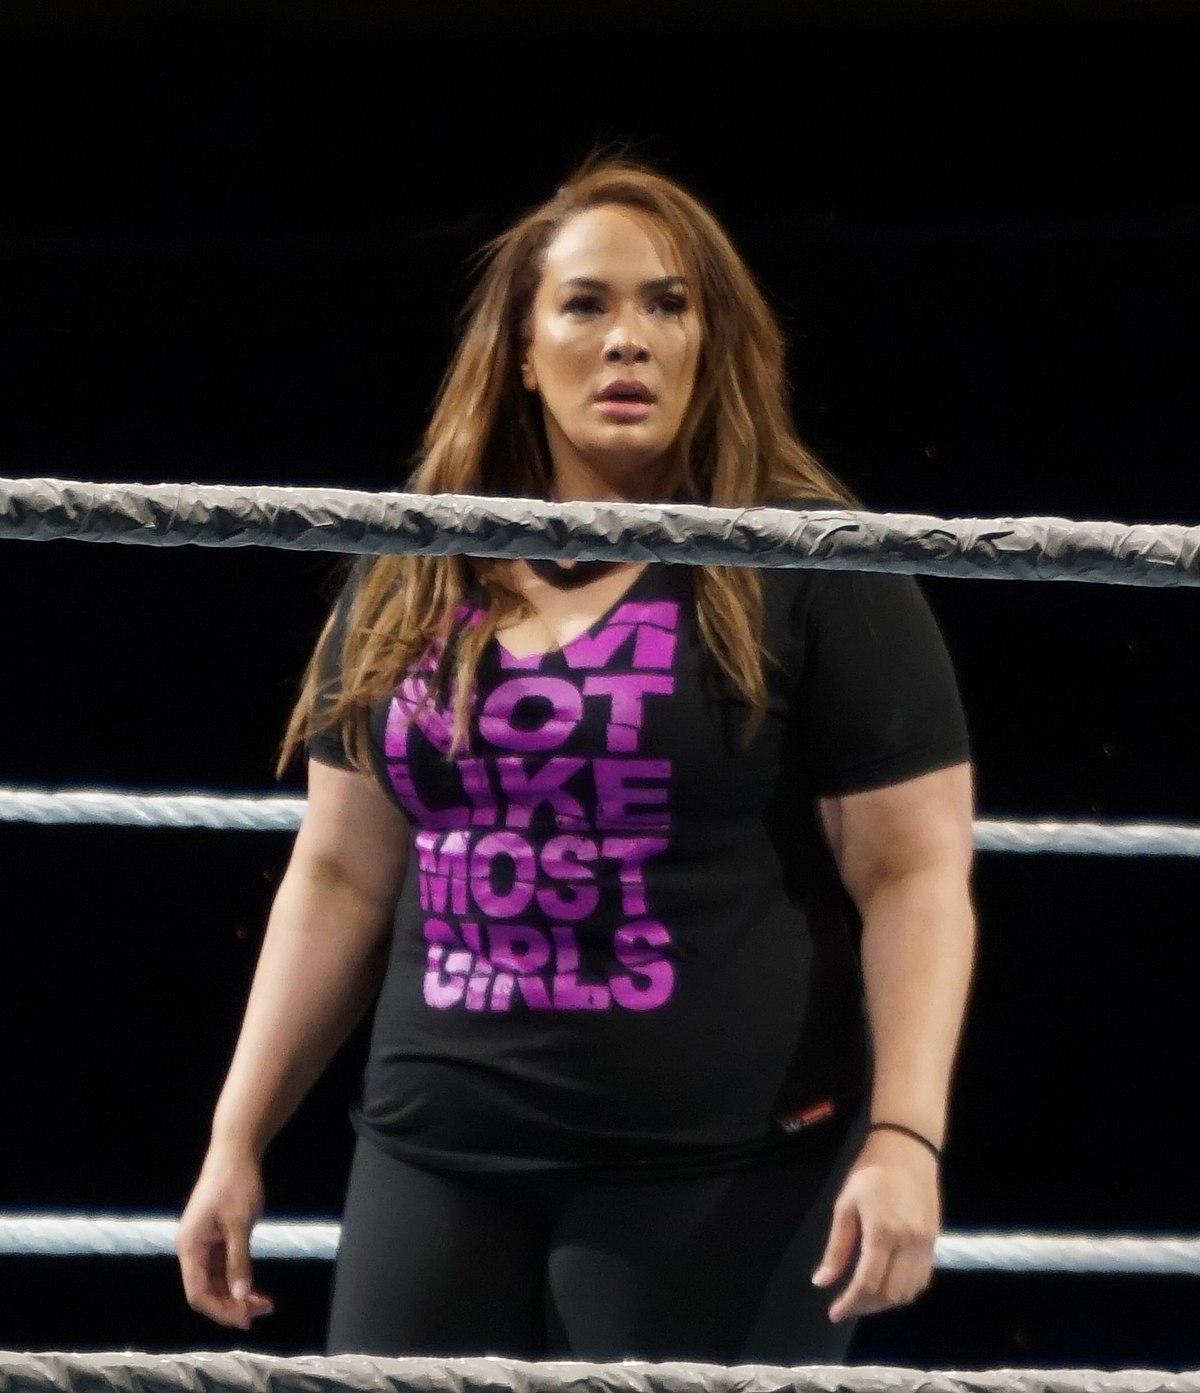 70+ Hot Pictures Of Nia Jax Are Here To Take Your Breath Away 17